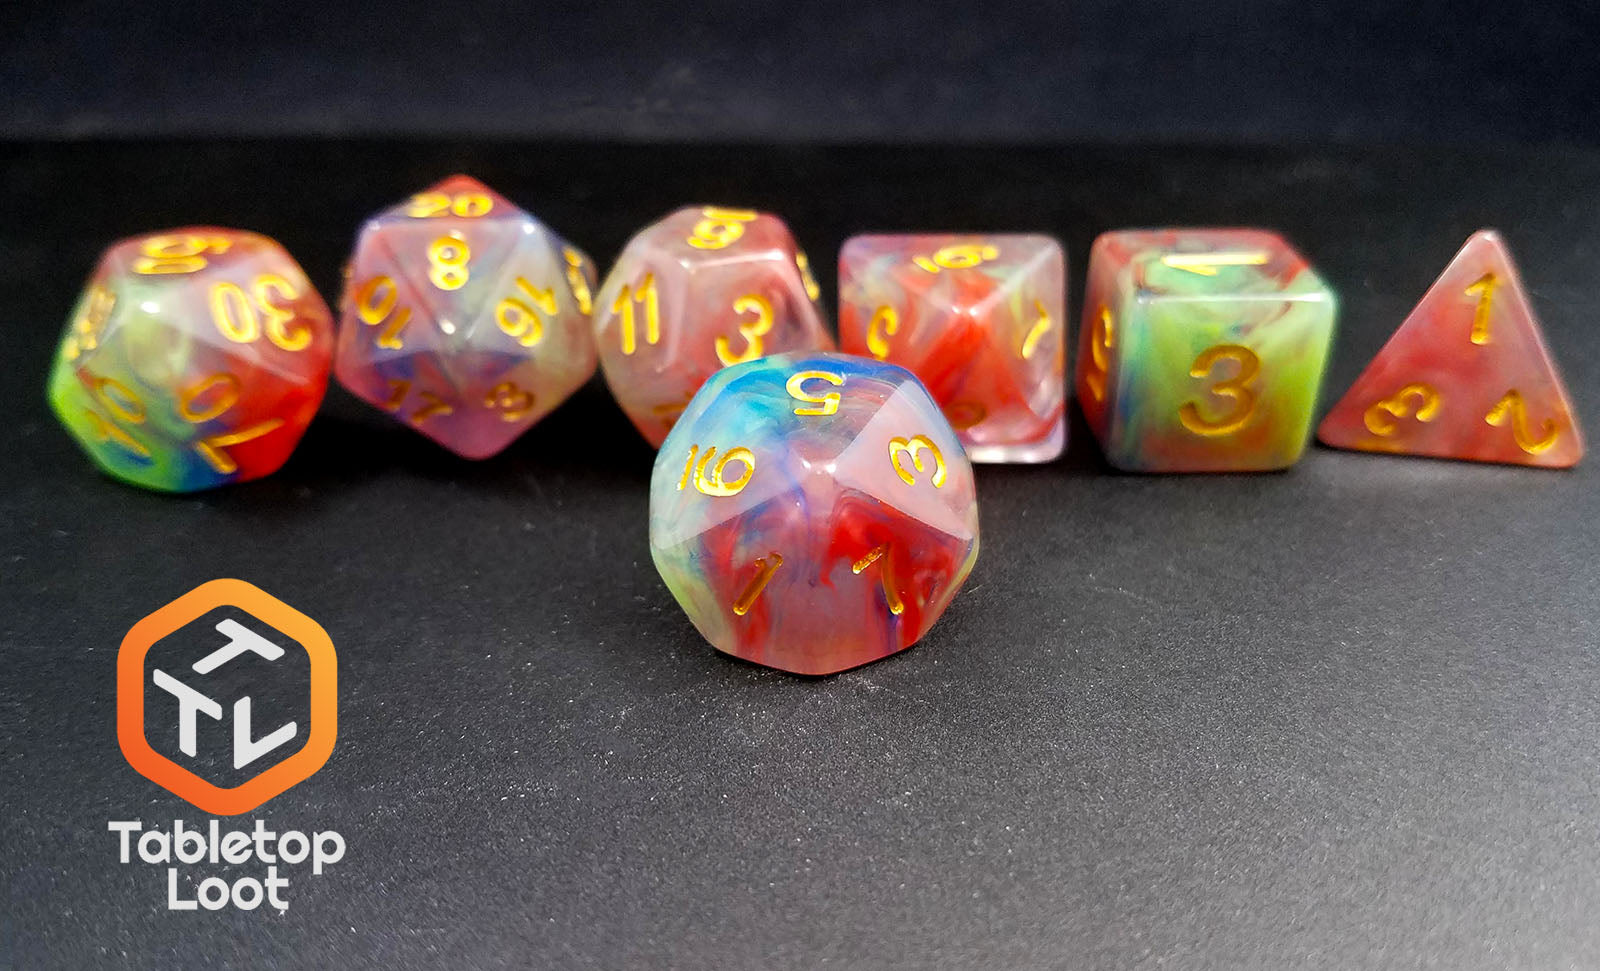 The Soul Stone 7 piece dice set from Tabletop Loot with swirls of blue, red, green, purple, and gold resin and gold numbering.